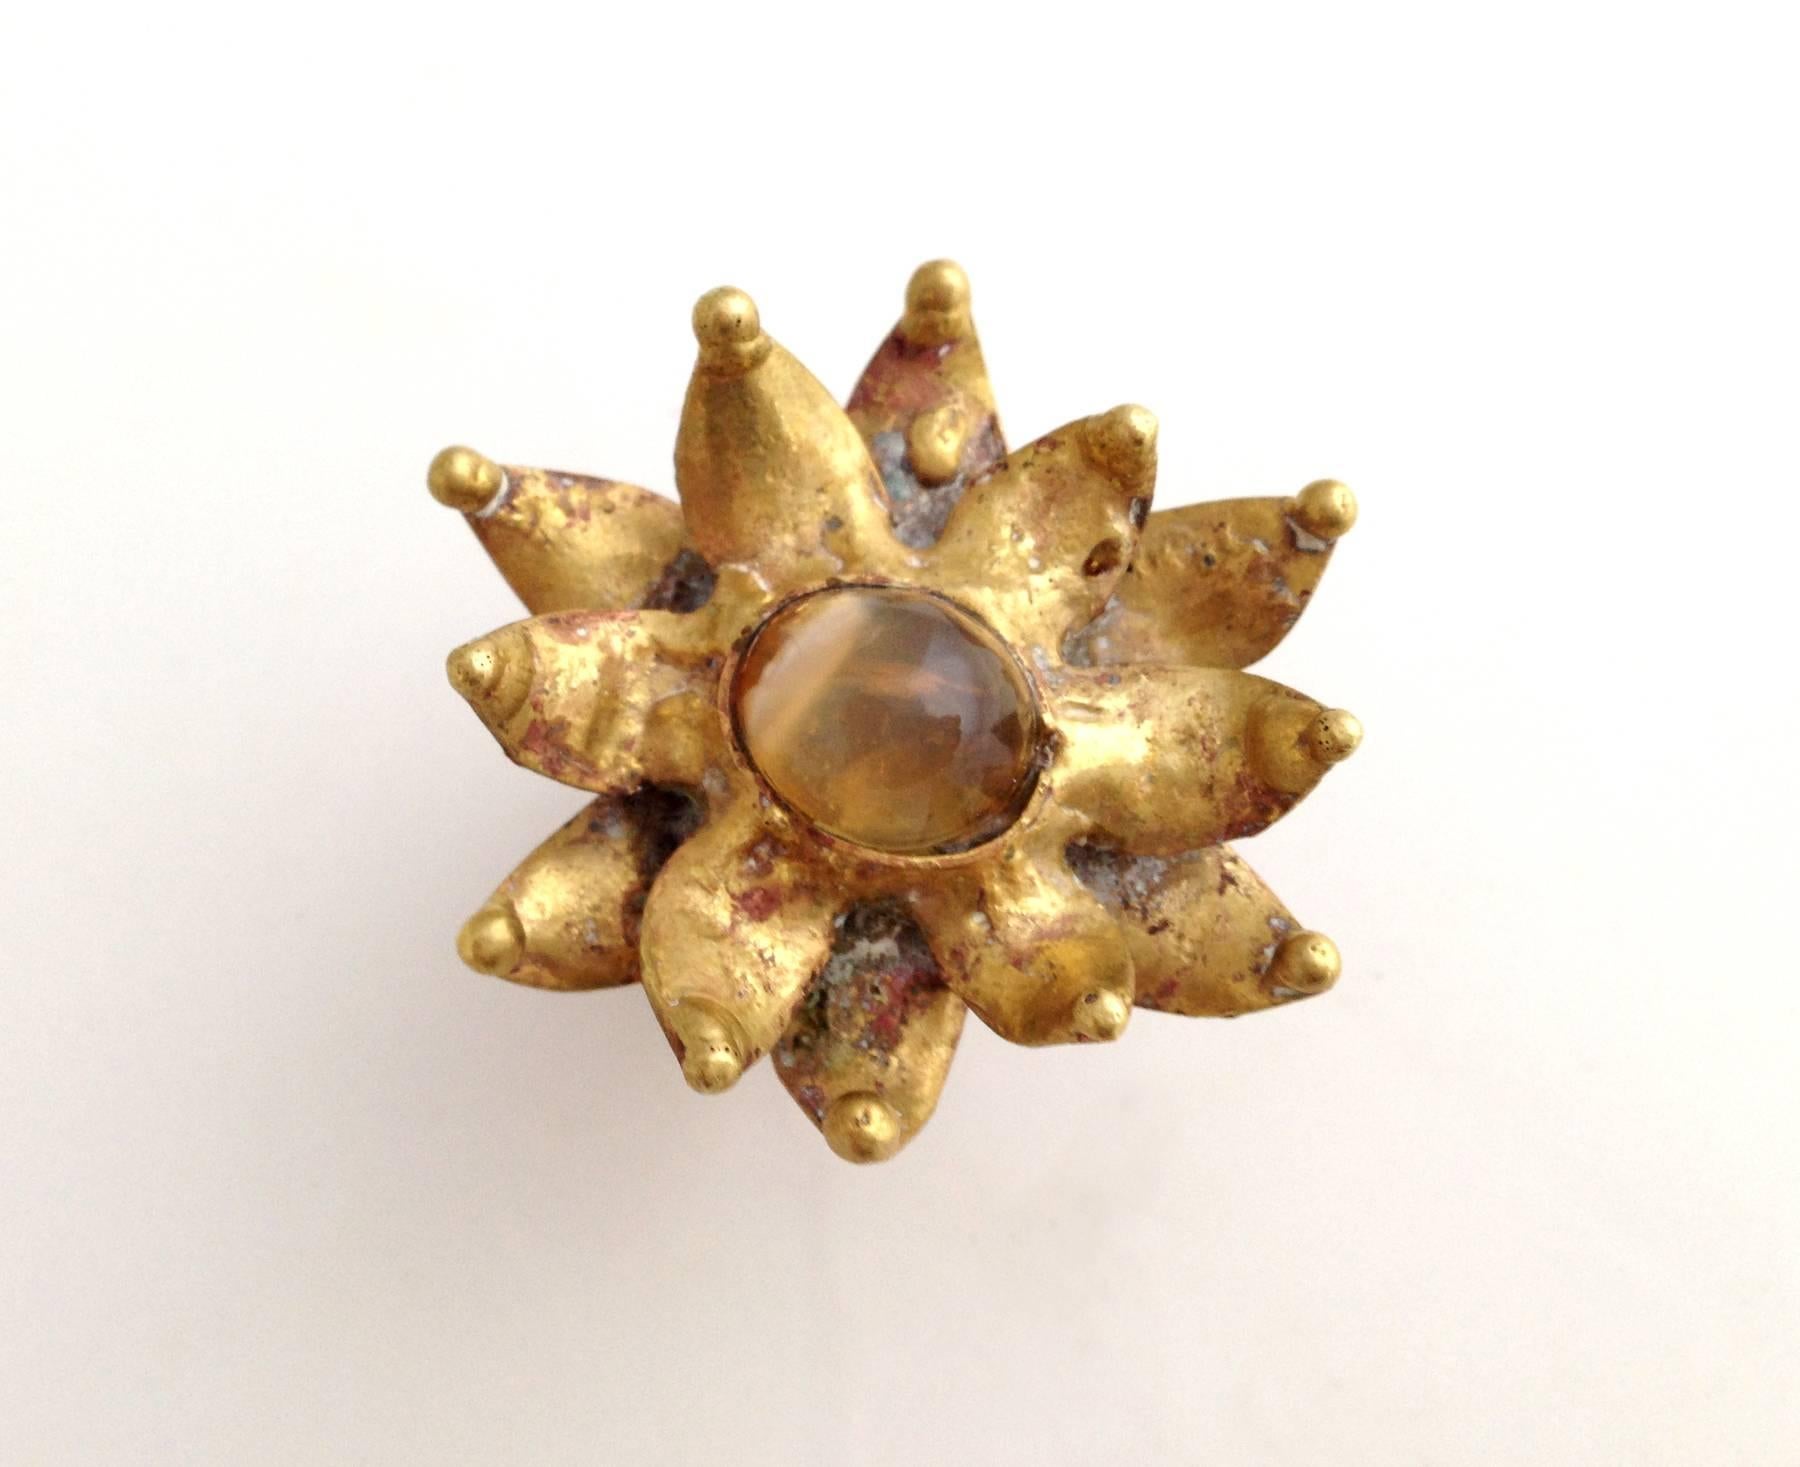 Bronze and light pink quartz flower ring created by Pal Kepenyes of Acapulco, Mexico.  Ring is a finger size 7 - 7.25.  Face of the ring measures 1 3/4